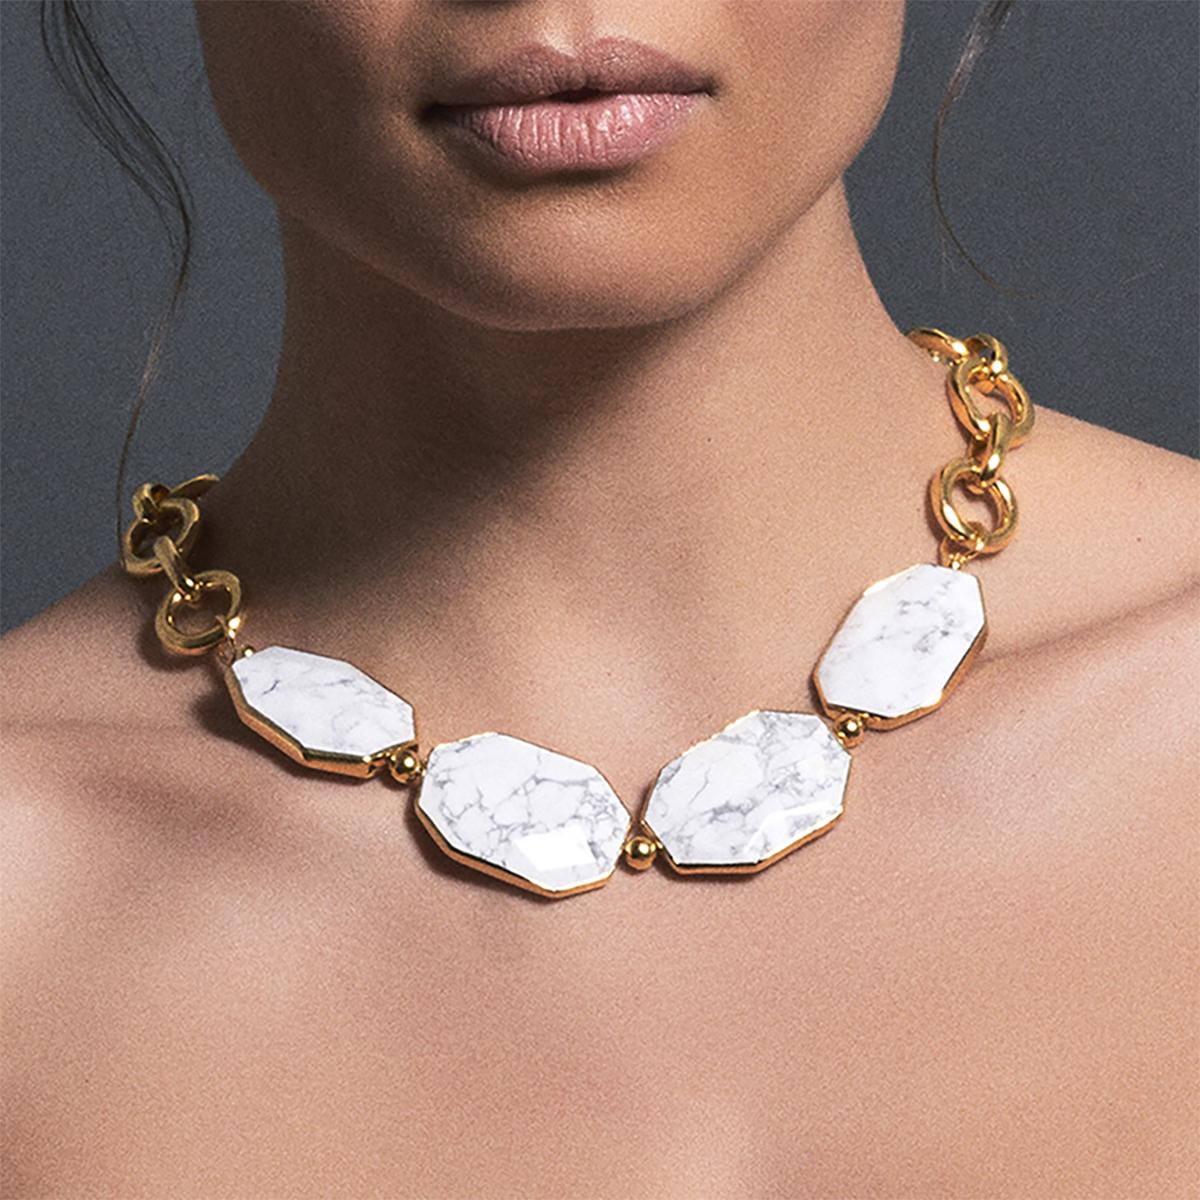 The Renaissance Romance Necklace is inspired by the first time A Love Affair develops in Europe. It specifically celebrates the revolutionary skills, beauty, and prestige ingrained in Italian history. Howlite stone represents the deep-rooted Italian